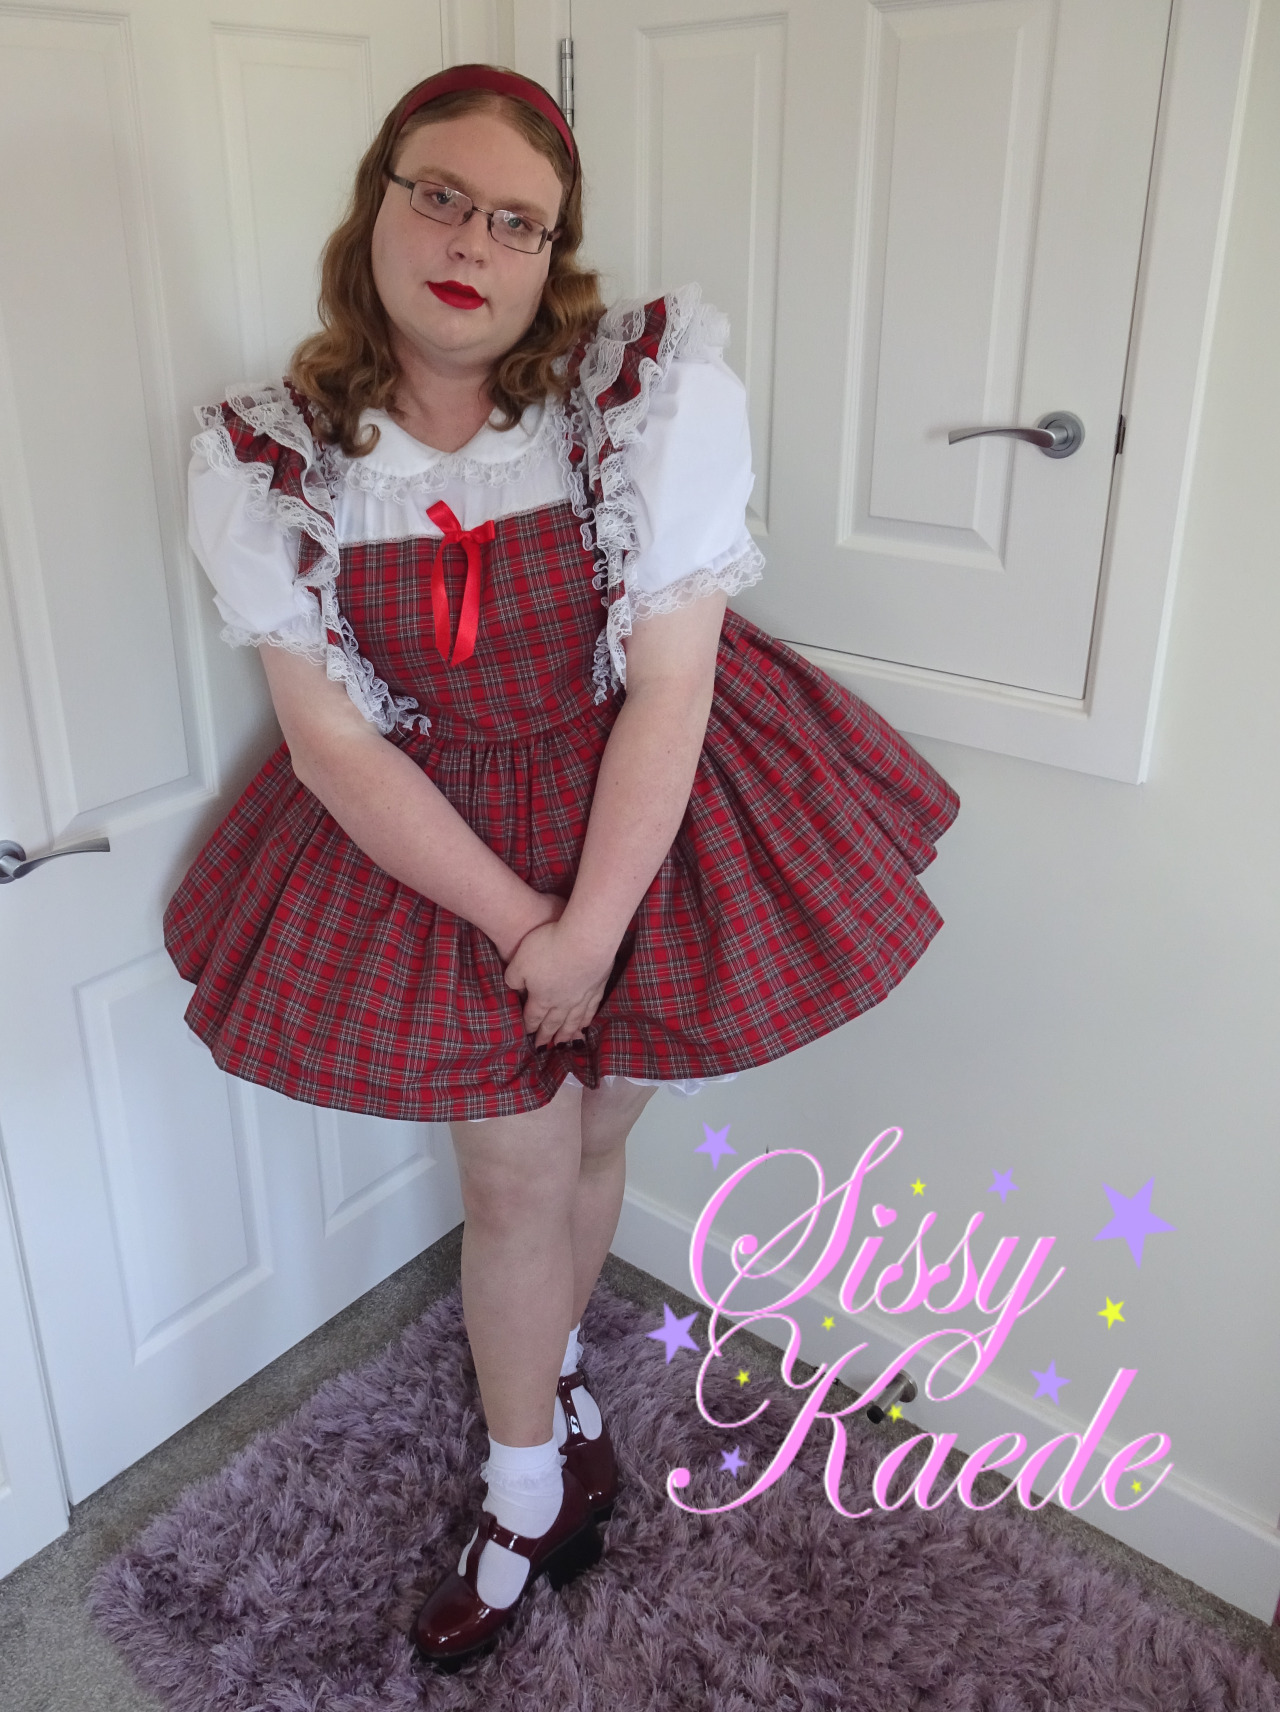 Hope  lots of my sissy sisters are dressing up for a sissy sunday with me  today. Fancied my red dress today, a nice dress always makes this sissy  much happier hehe.Trying to get my hair curlier with mixed results lol #sissy#sissygirl#prissysissy#prissy#frillysissy#sissydress#sissyschoolgirl